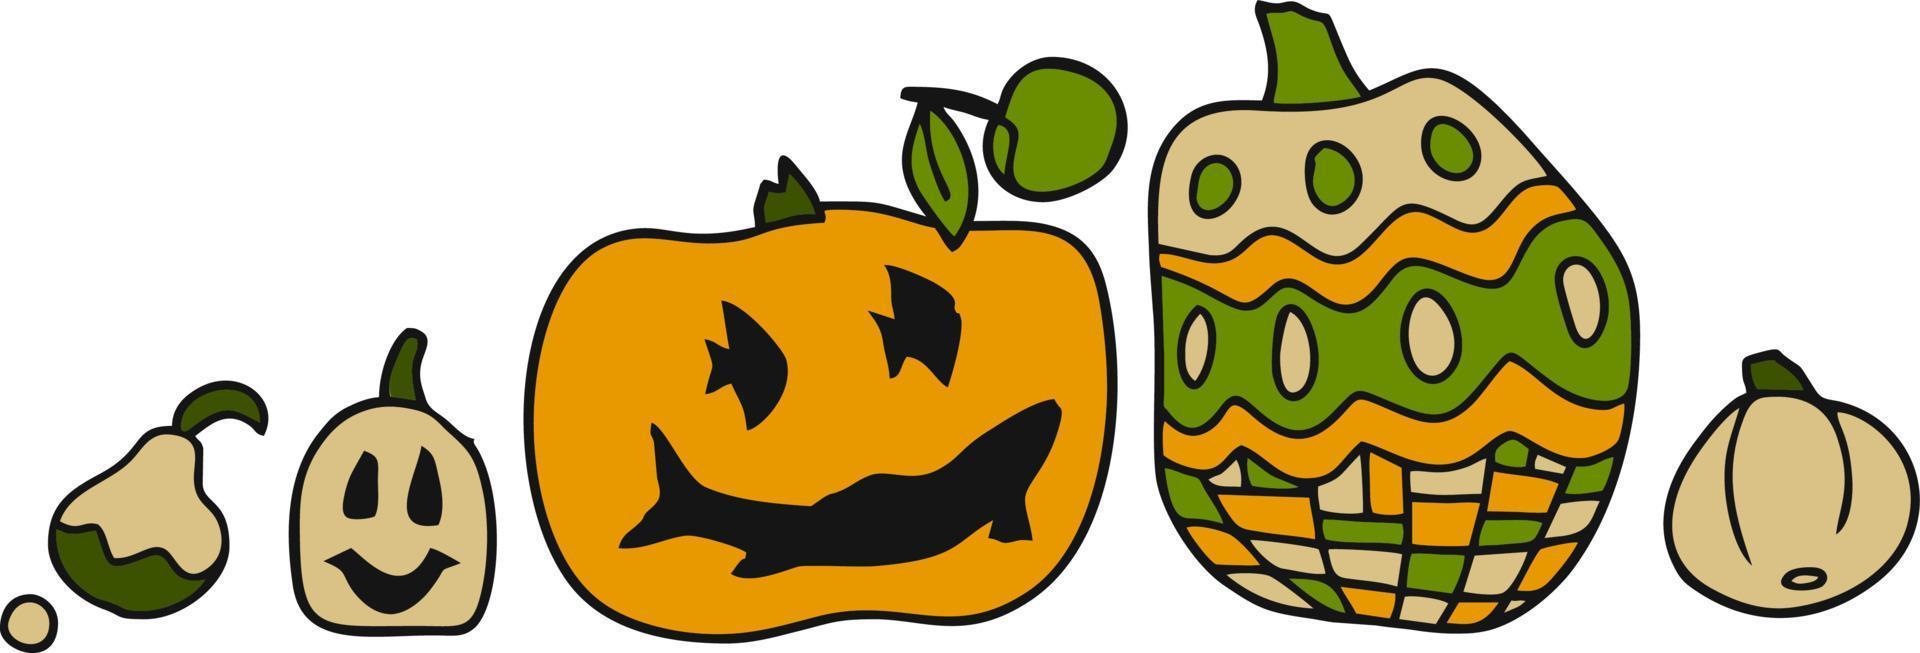 Big and small pumpkins for Happy Halloween vector